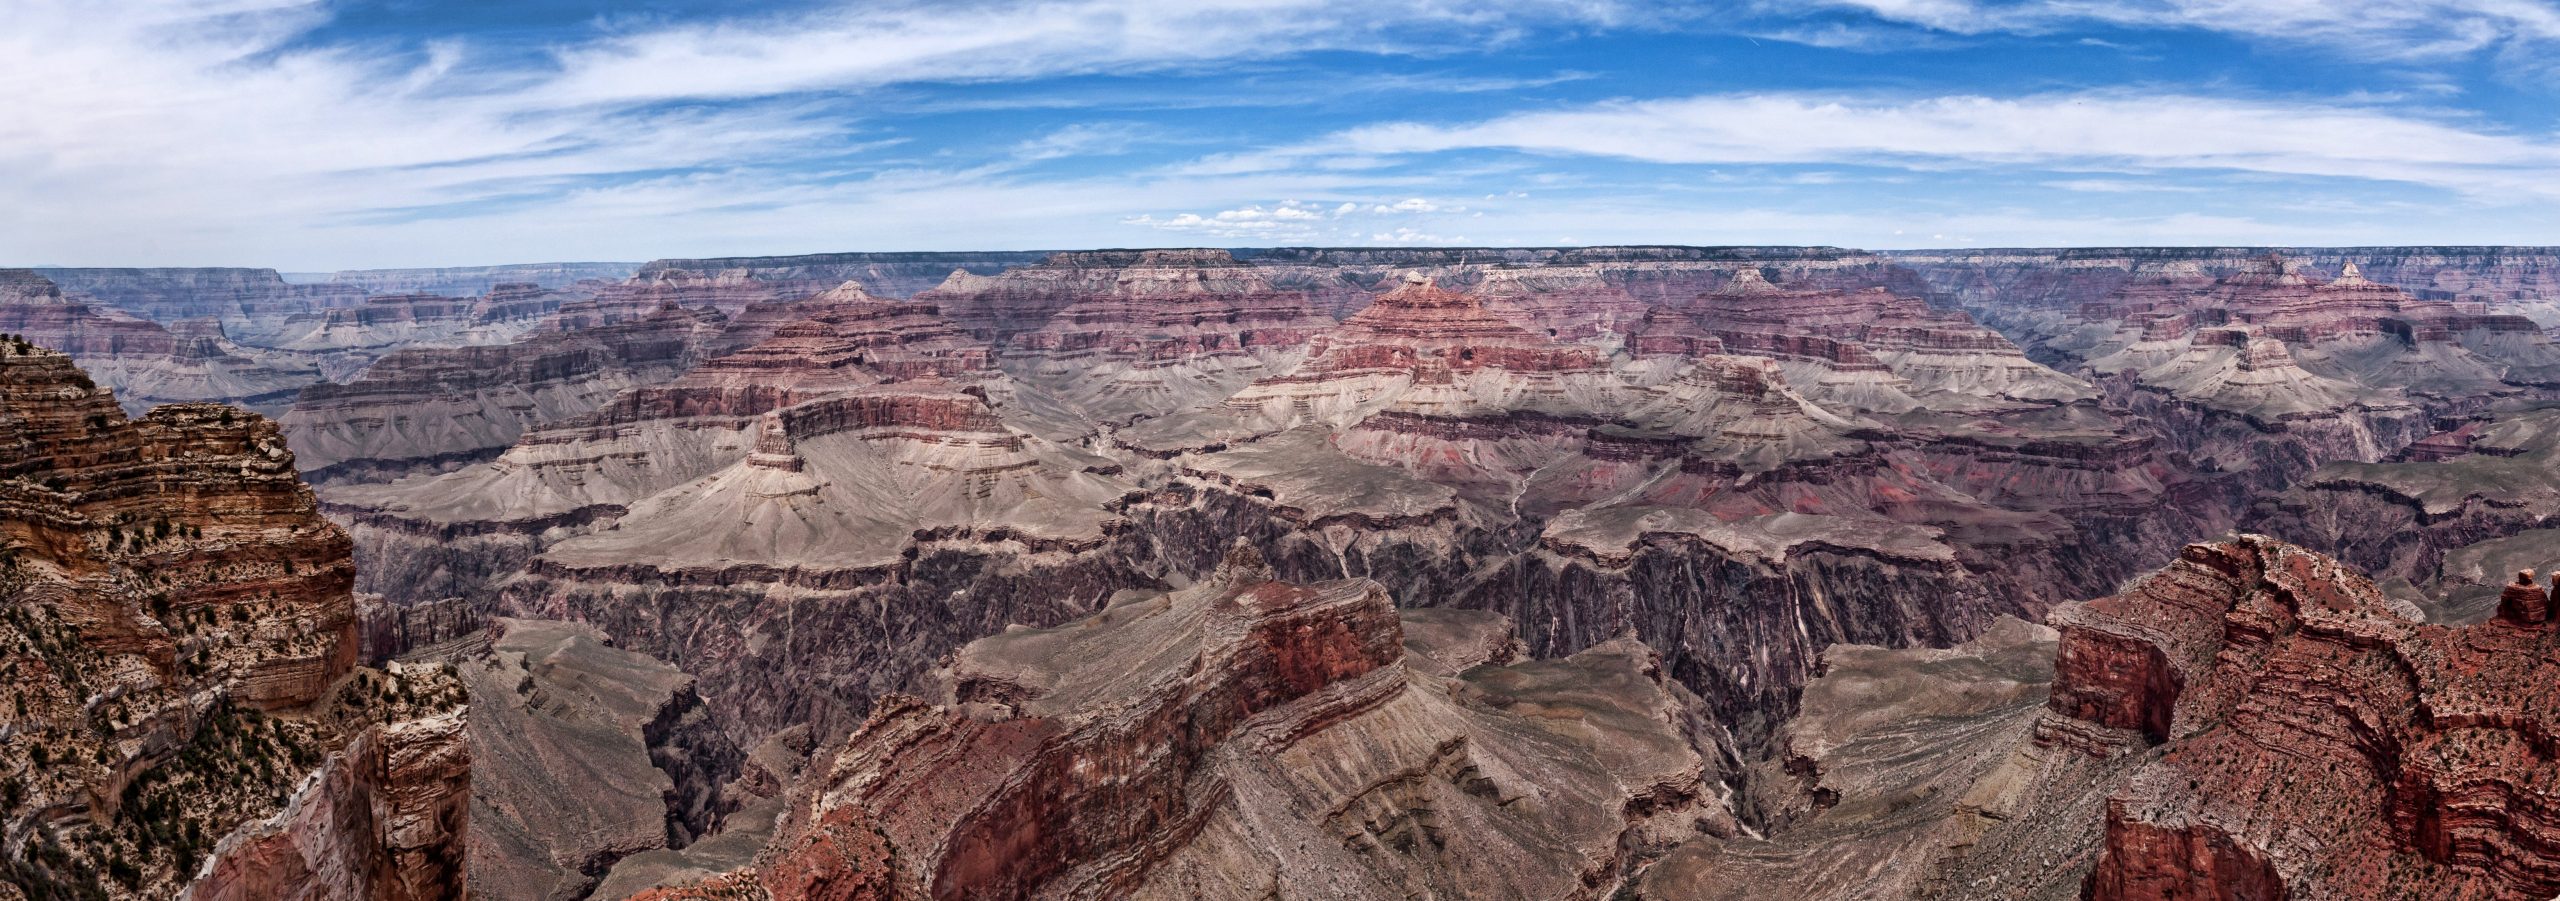 Photo of the Grand Canyon showing expanse of canyon and the various rock layers